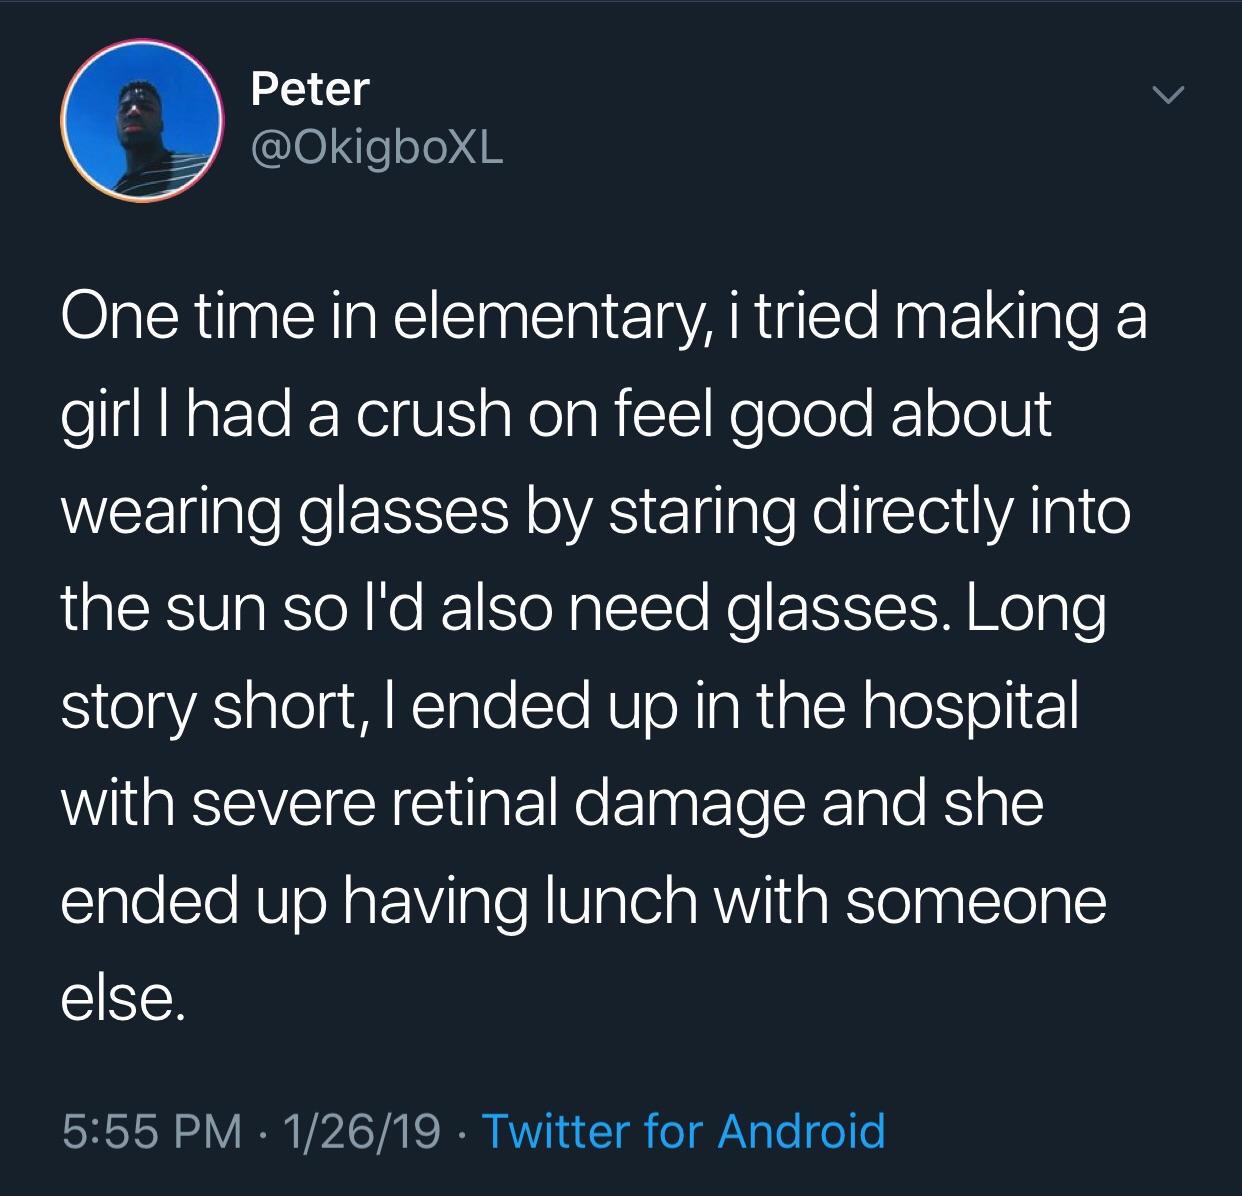 memes - a Peter Peter One time in elementary, i tried making a girl I had a crush on feel good about wearing glasses by staring directly into the sun so I'd also need glasses. Long story short, I ended up in the hospital with severe retinal damage and she